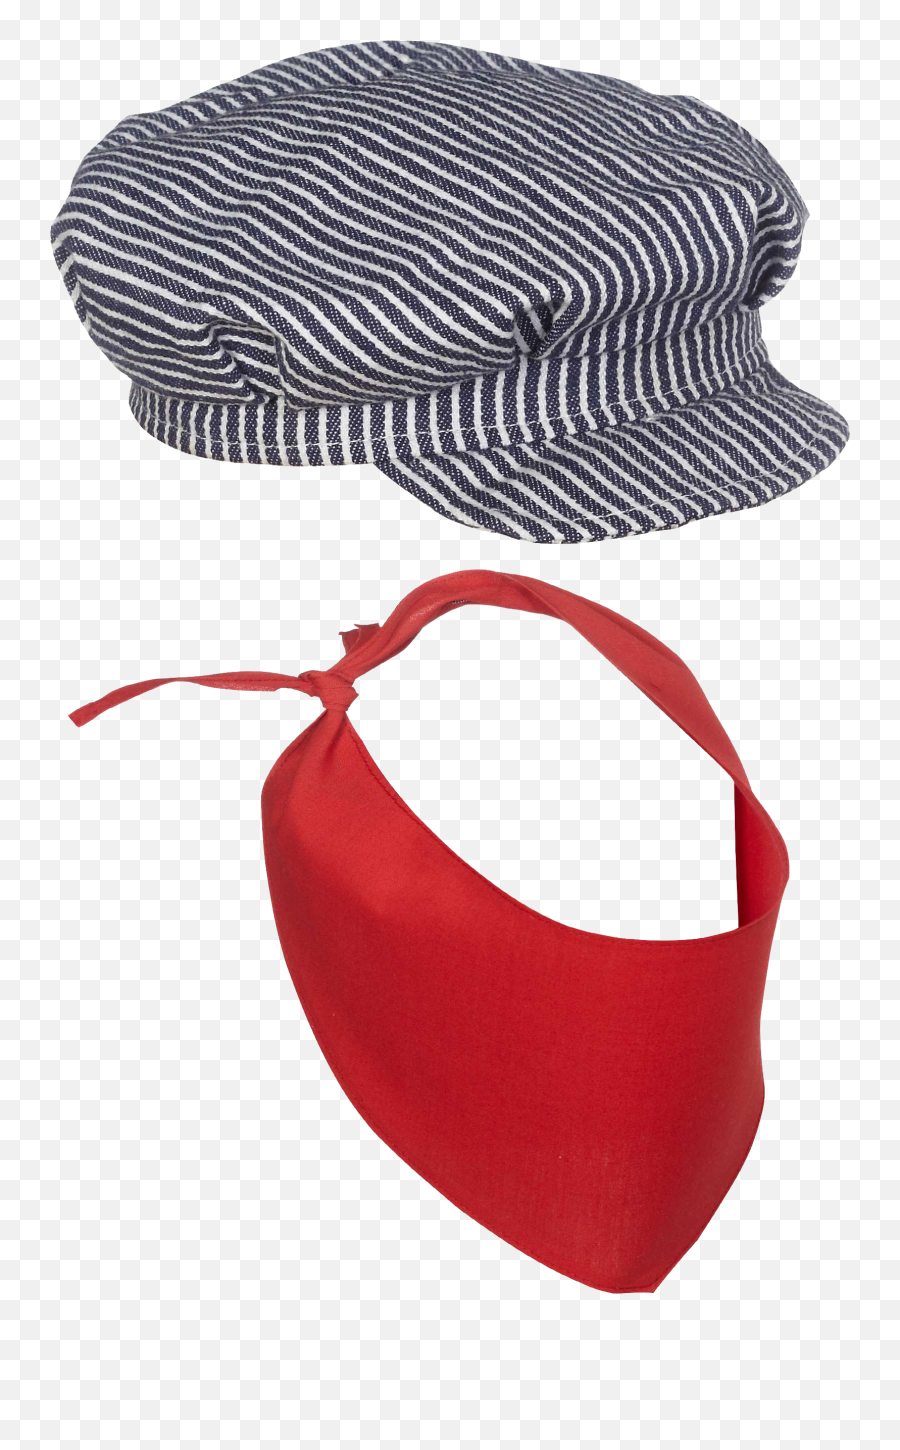 Download Free Png Train Conductor Hat U0026 Scarf Set - Transparent Train Conductor Hat Png,Red Cap Png